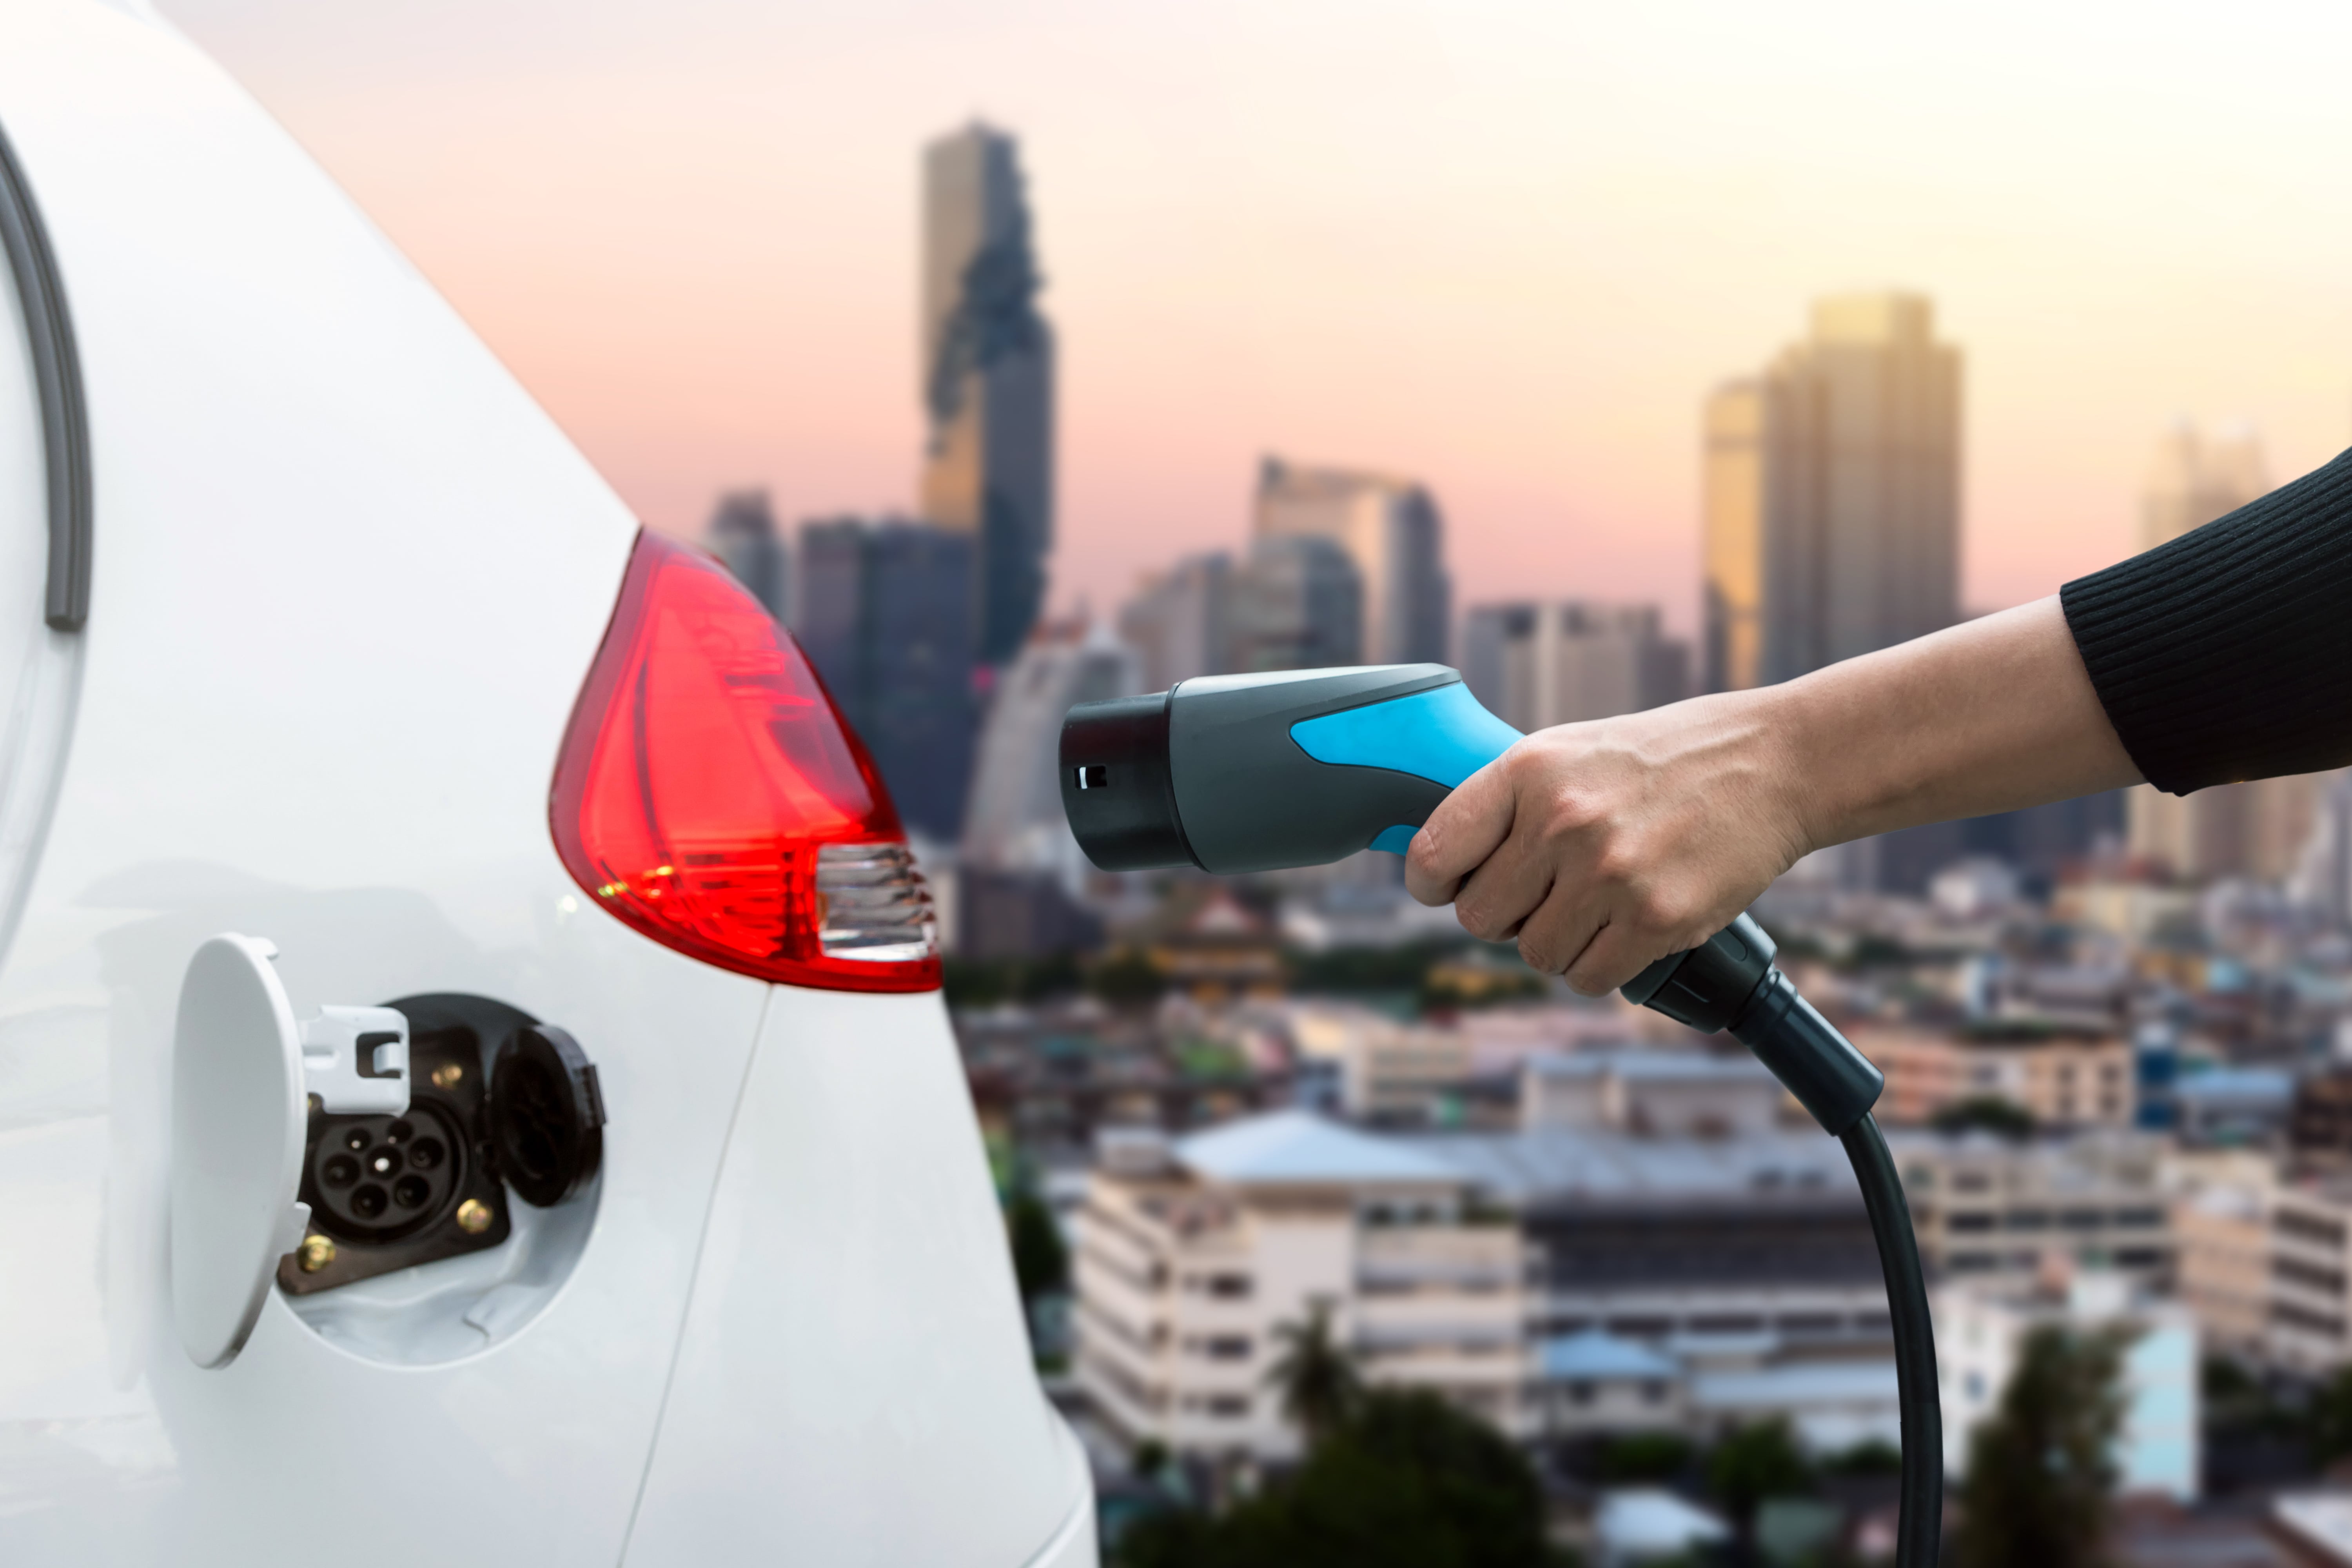 When will the electric vehicle dream become a reality?